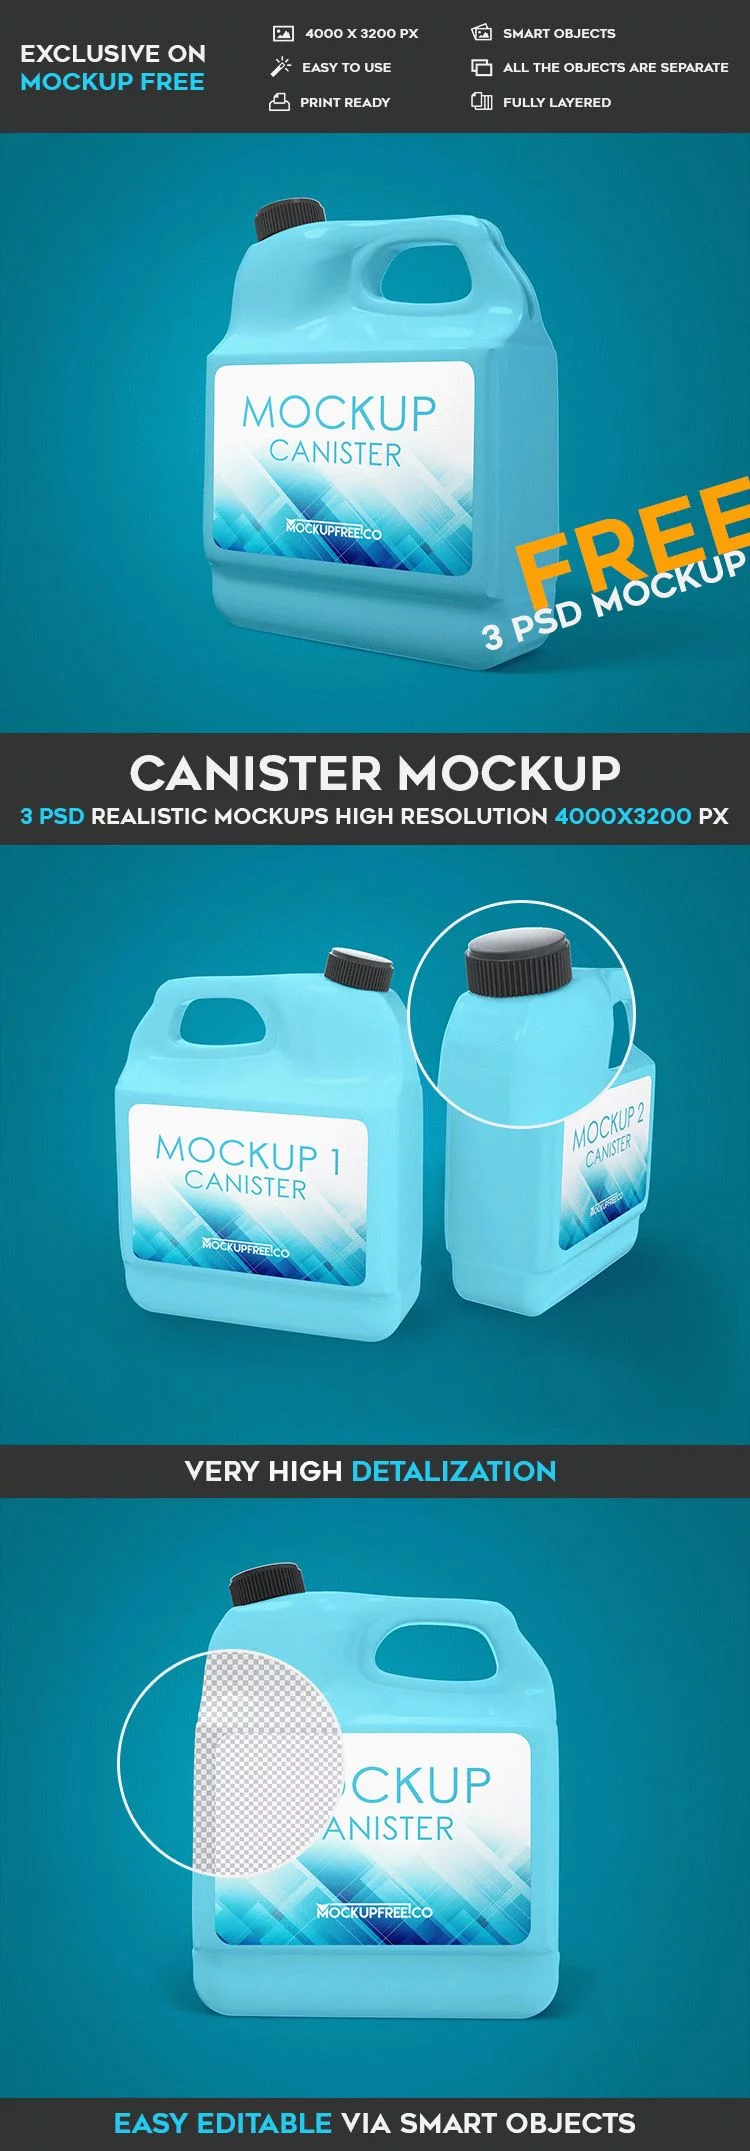 Canister – 3 Free PSD Mockups